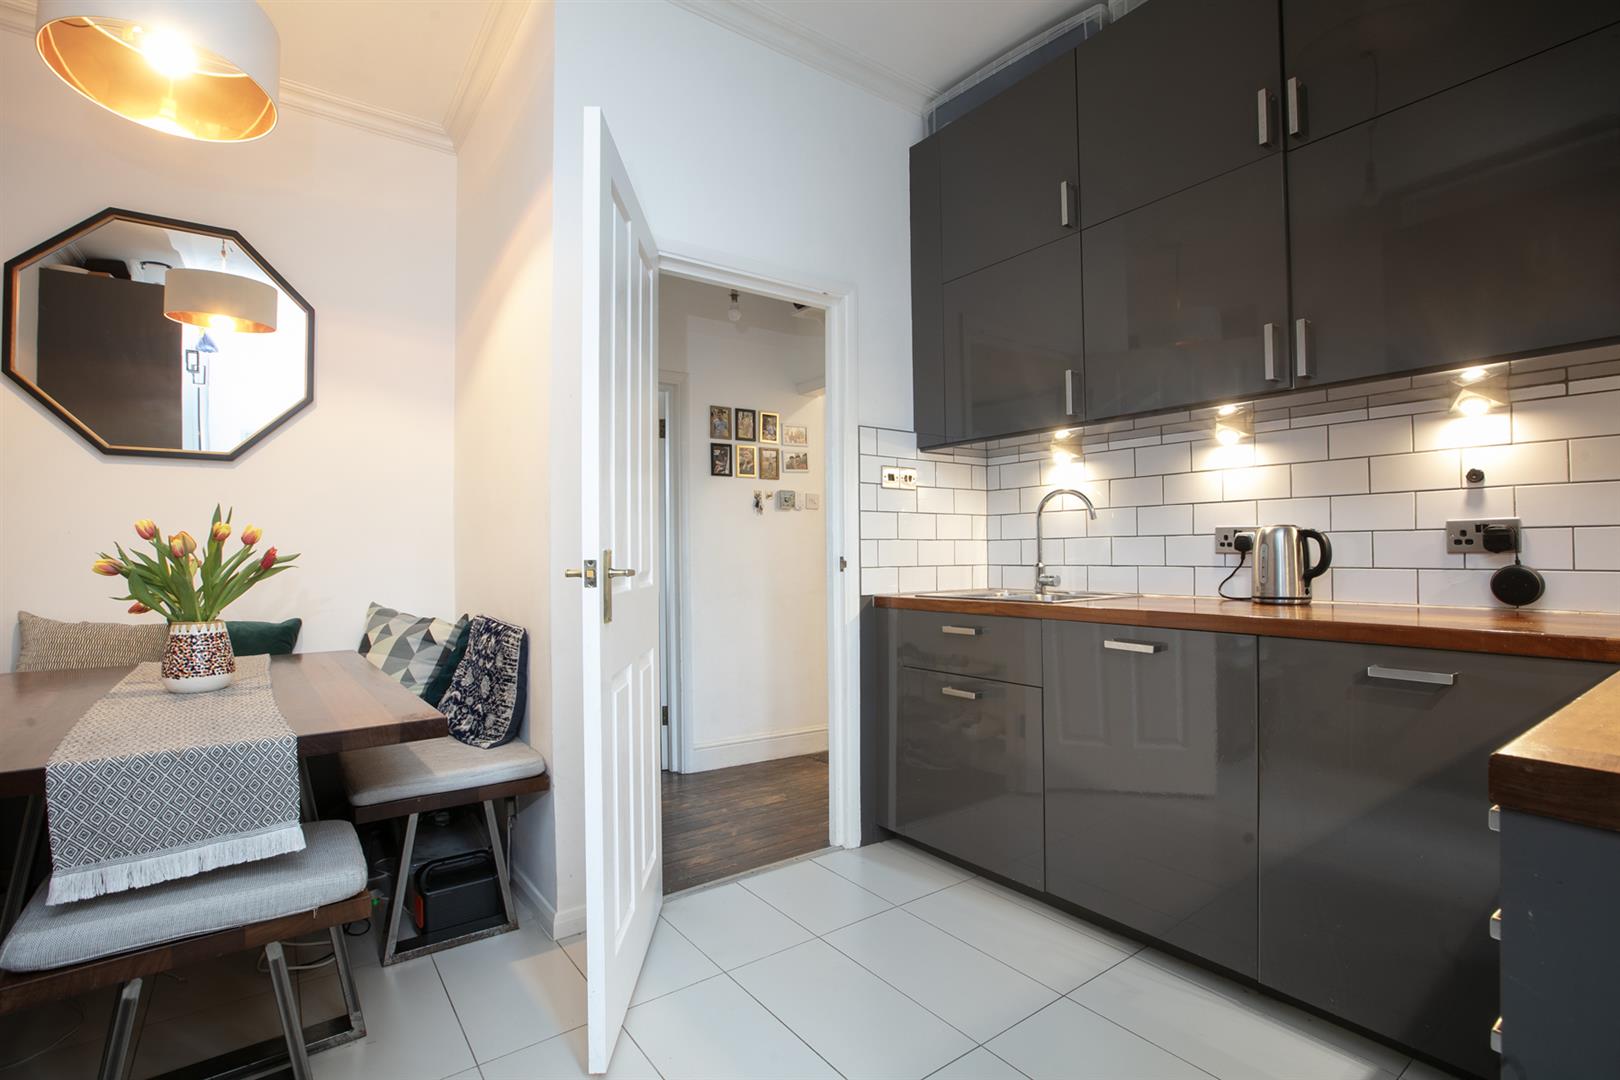 Flat - Conversion For Sale in Consort Road, Nunhead, SE15 1183 view6